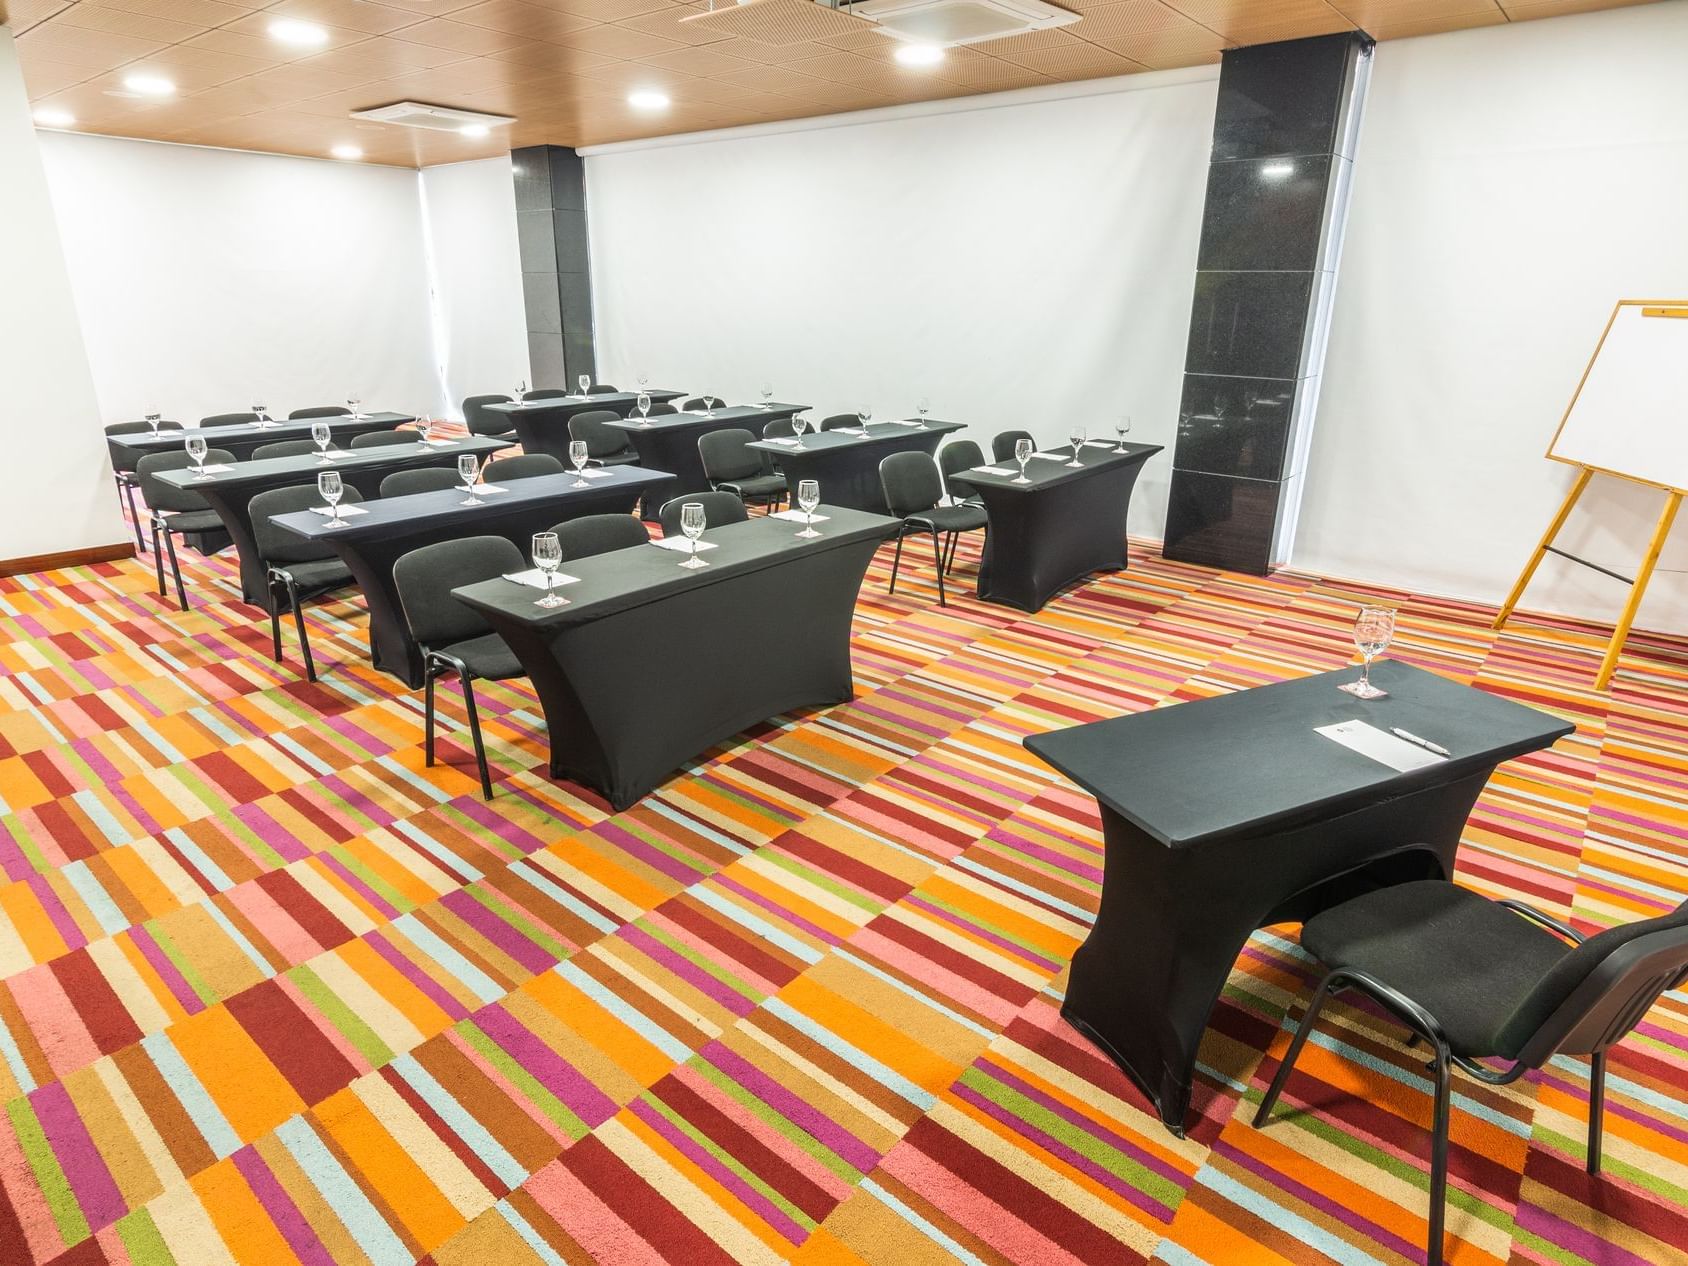 The arranged Oregon meeting room with black chairs and tables